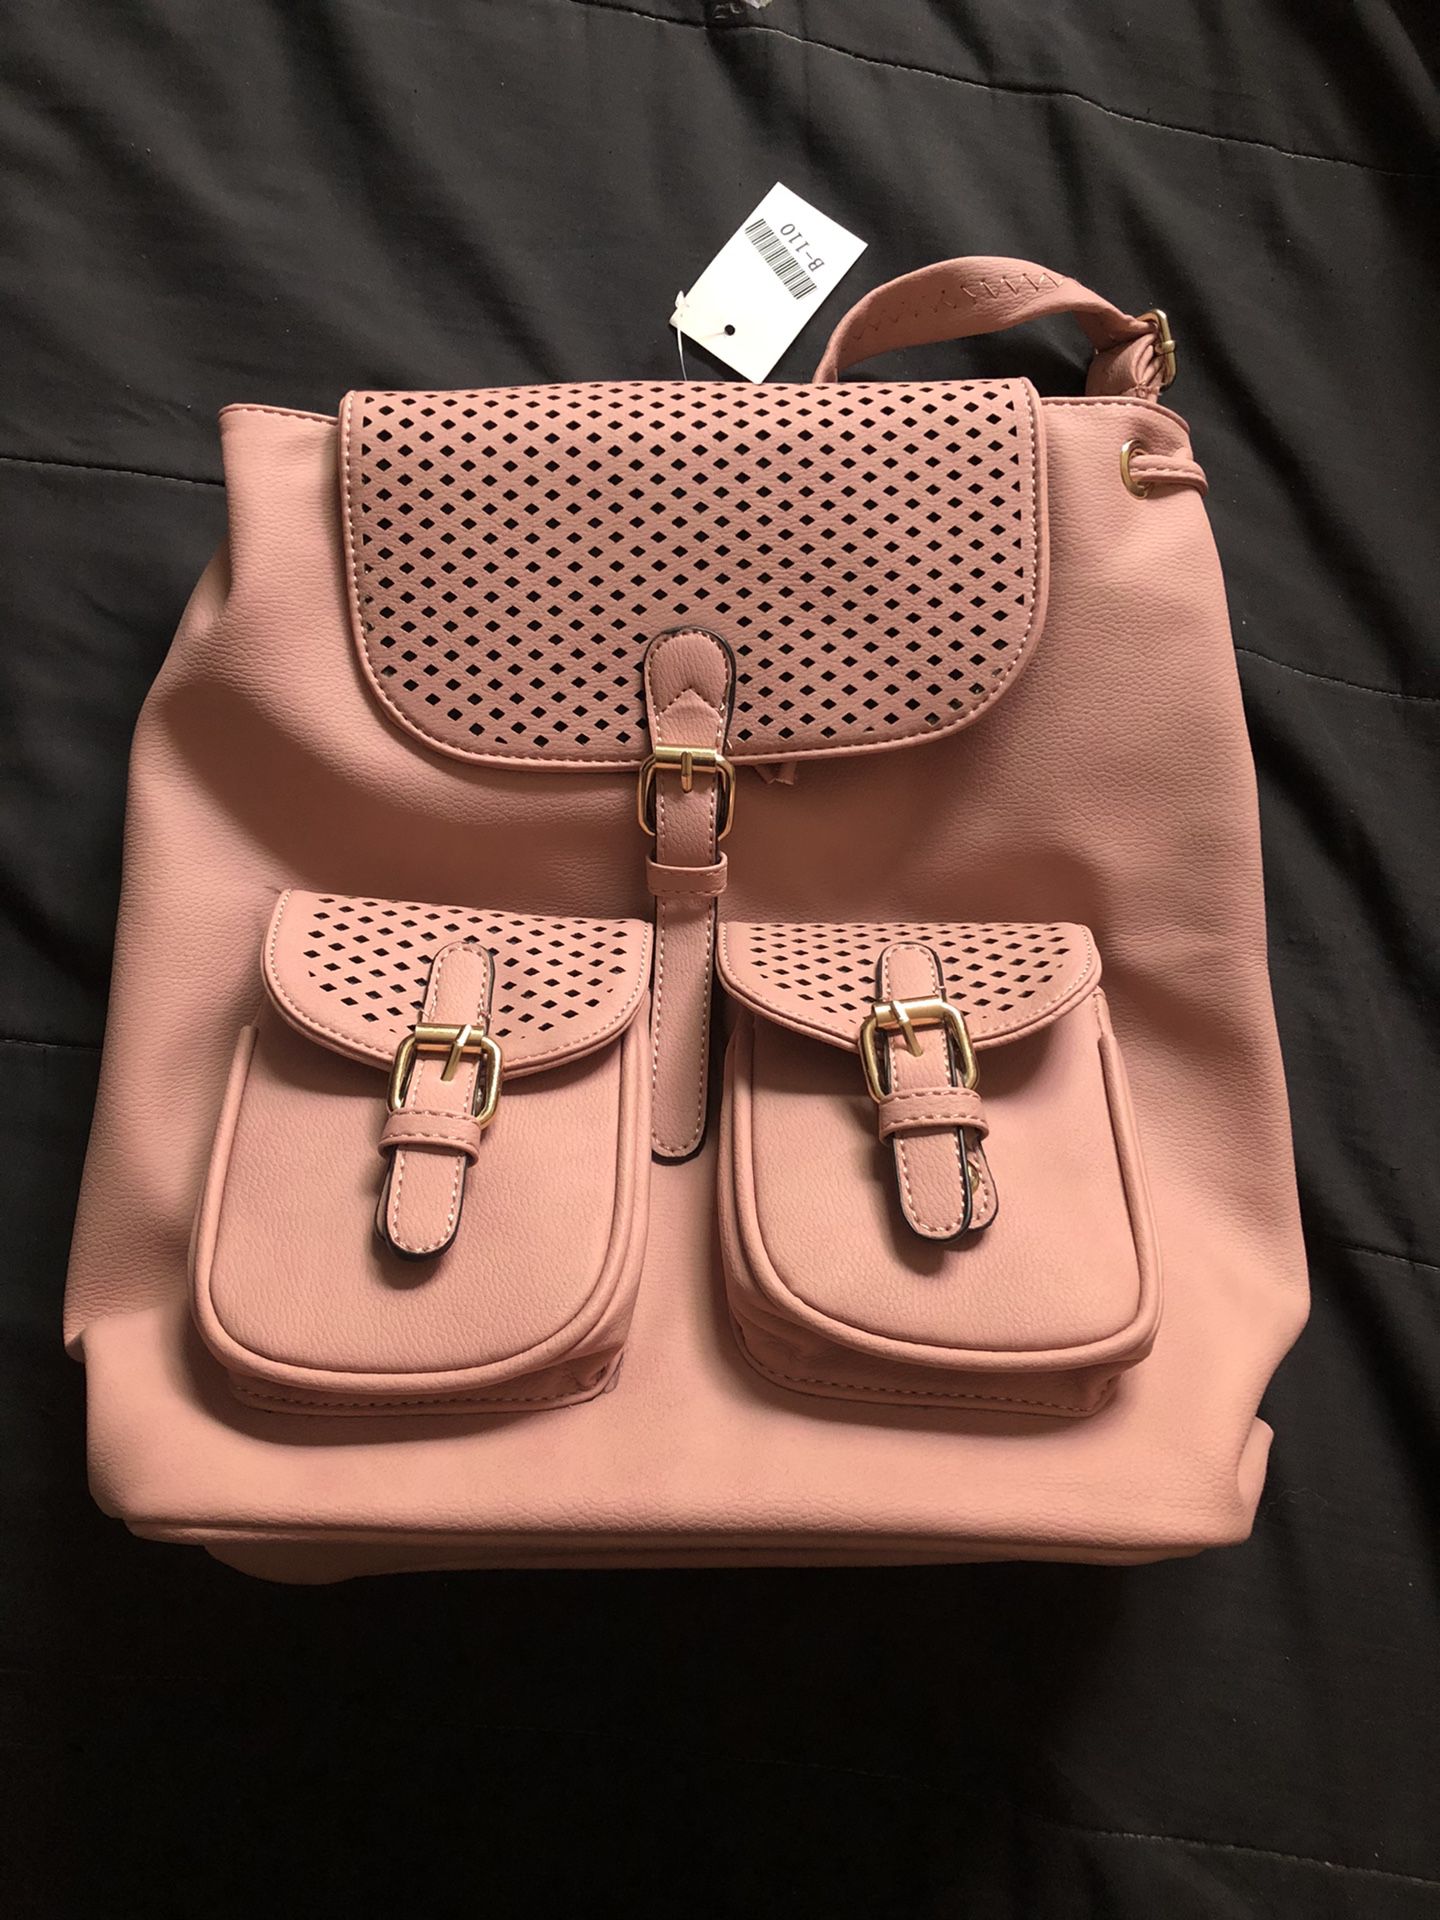 NEW!!! PINK LEATHER BACKPACK $20